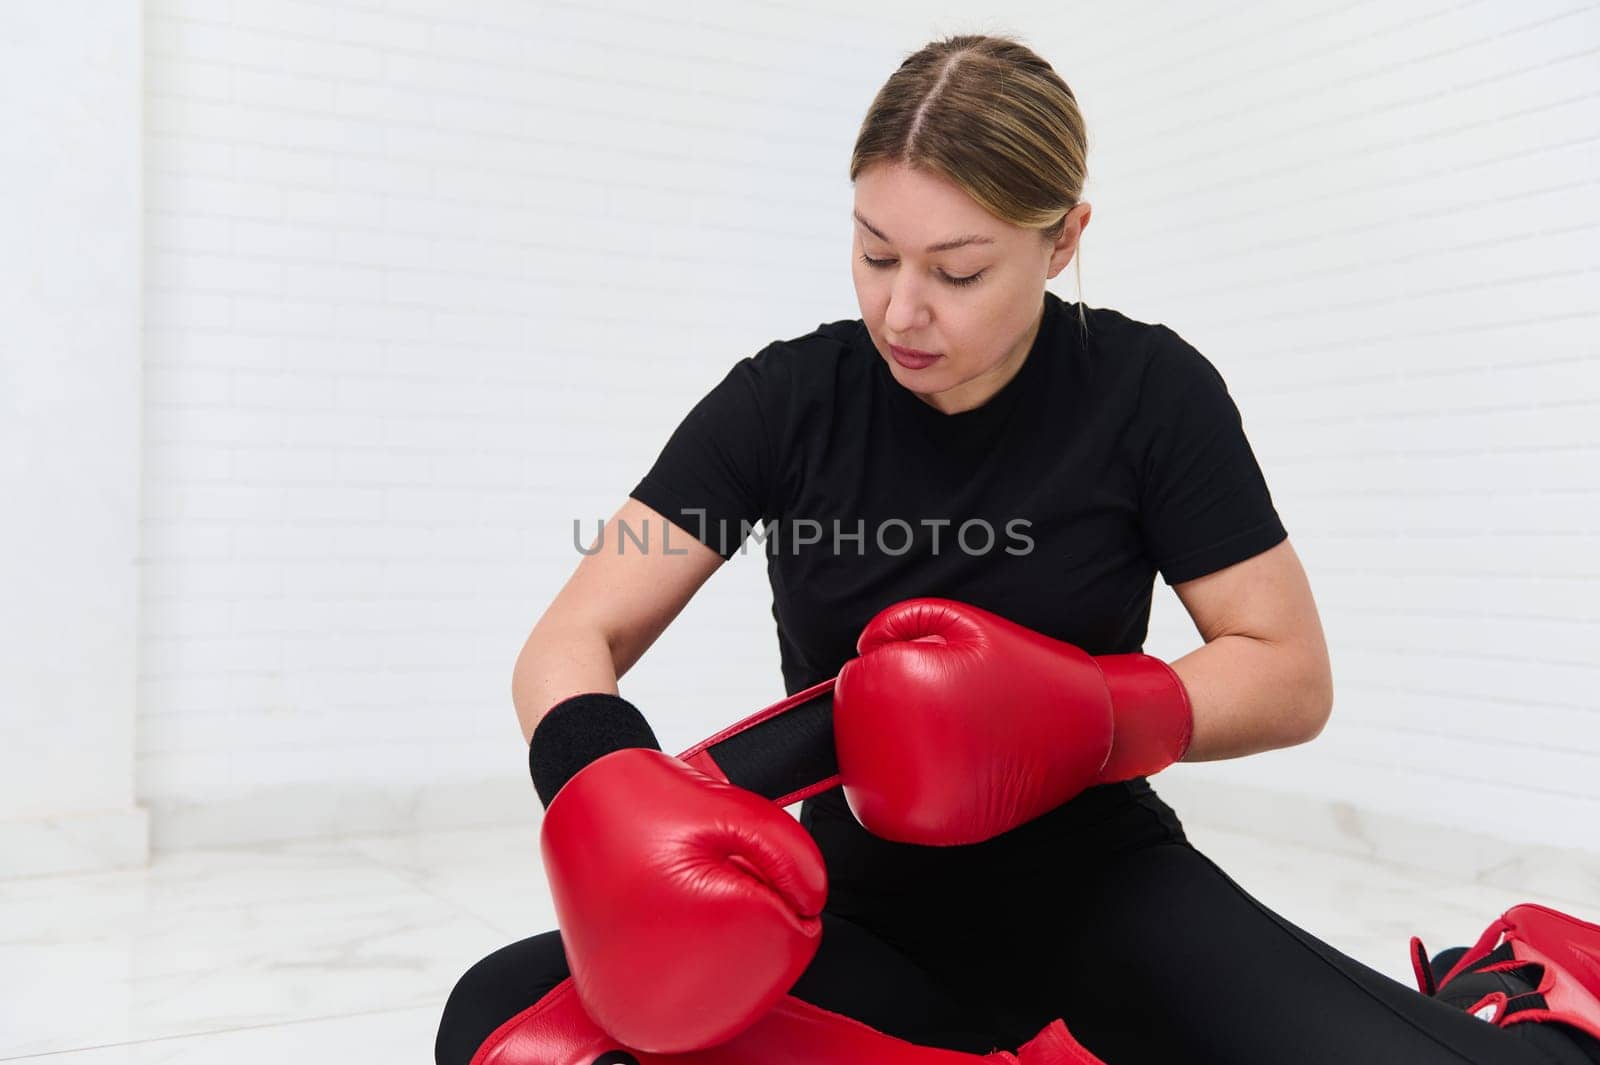 Determined European woman boxer, fighter in black sports wear, putting on boxing equipment and gloves, sitting on the floor, isolated over white wall background. Martial art, people and sport concept